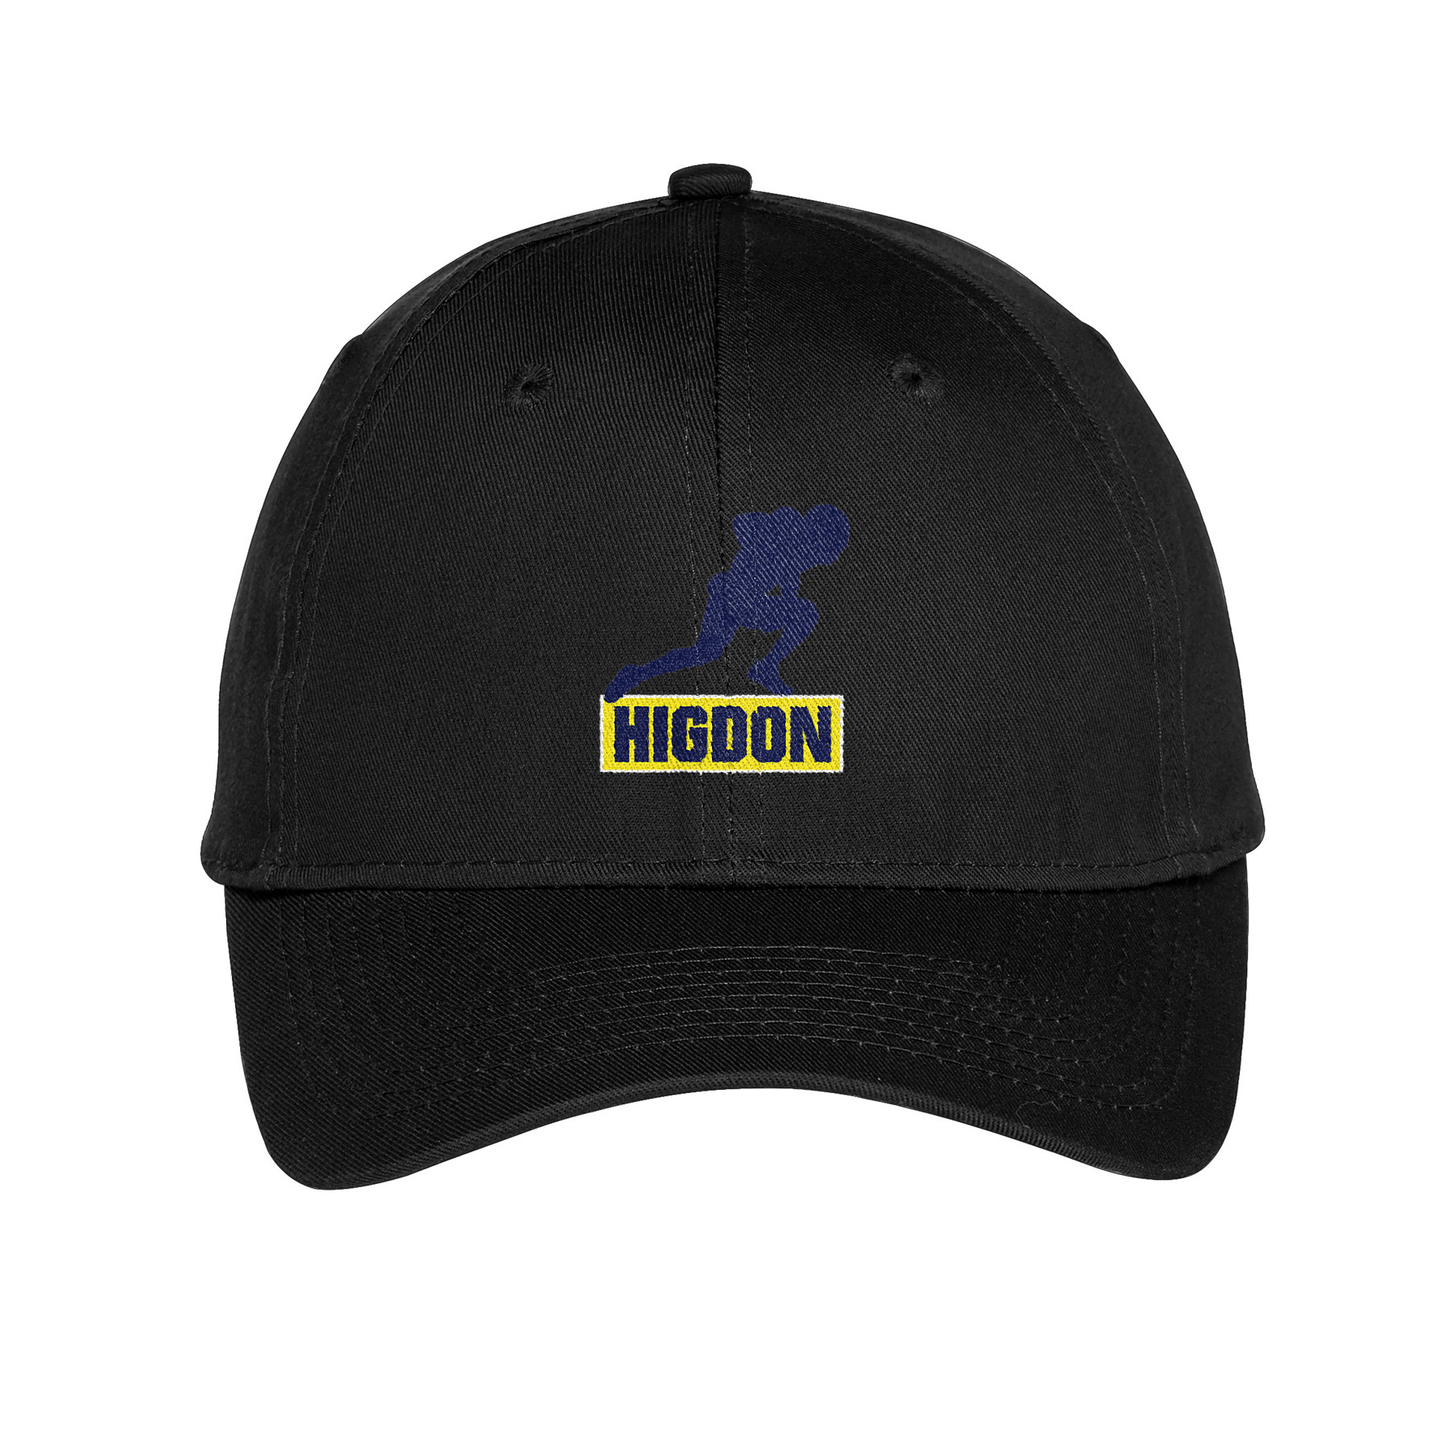 GT Higdon Embroidered Twill Cap